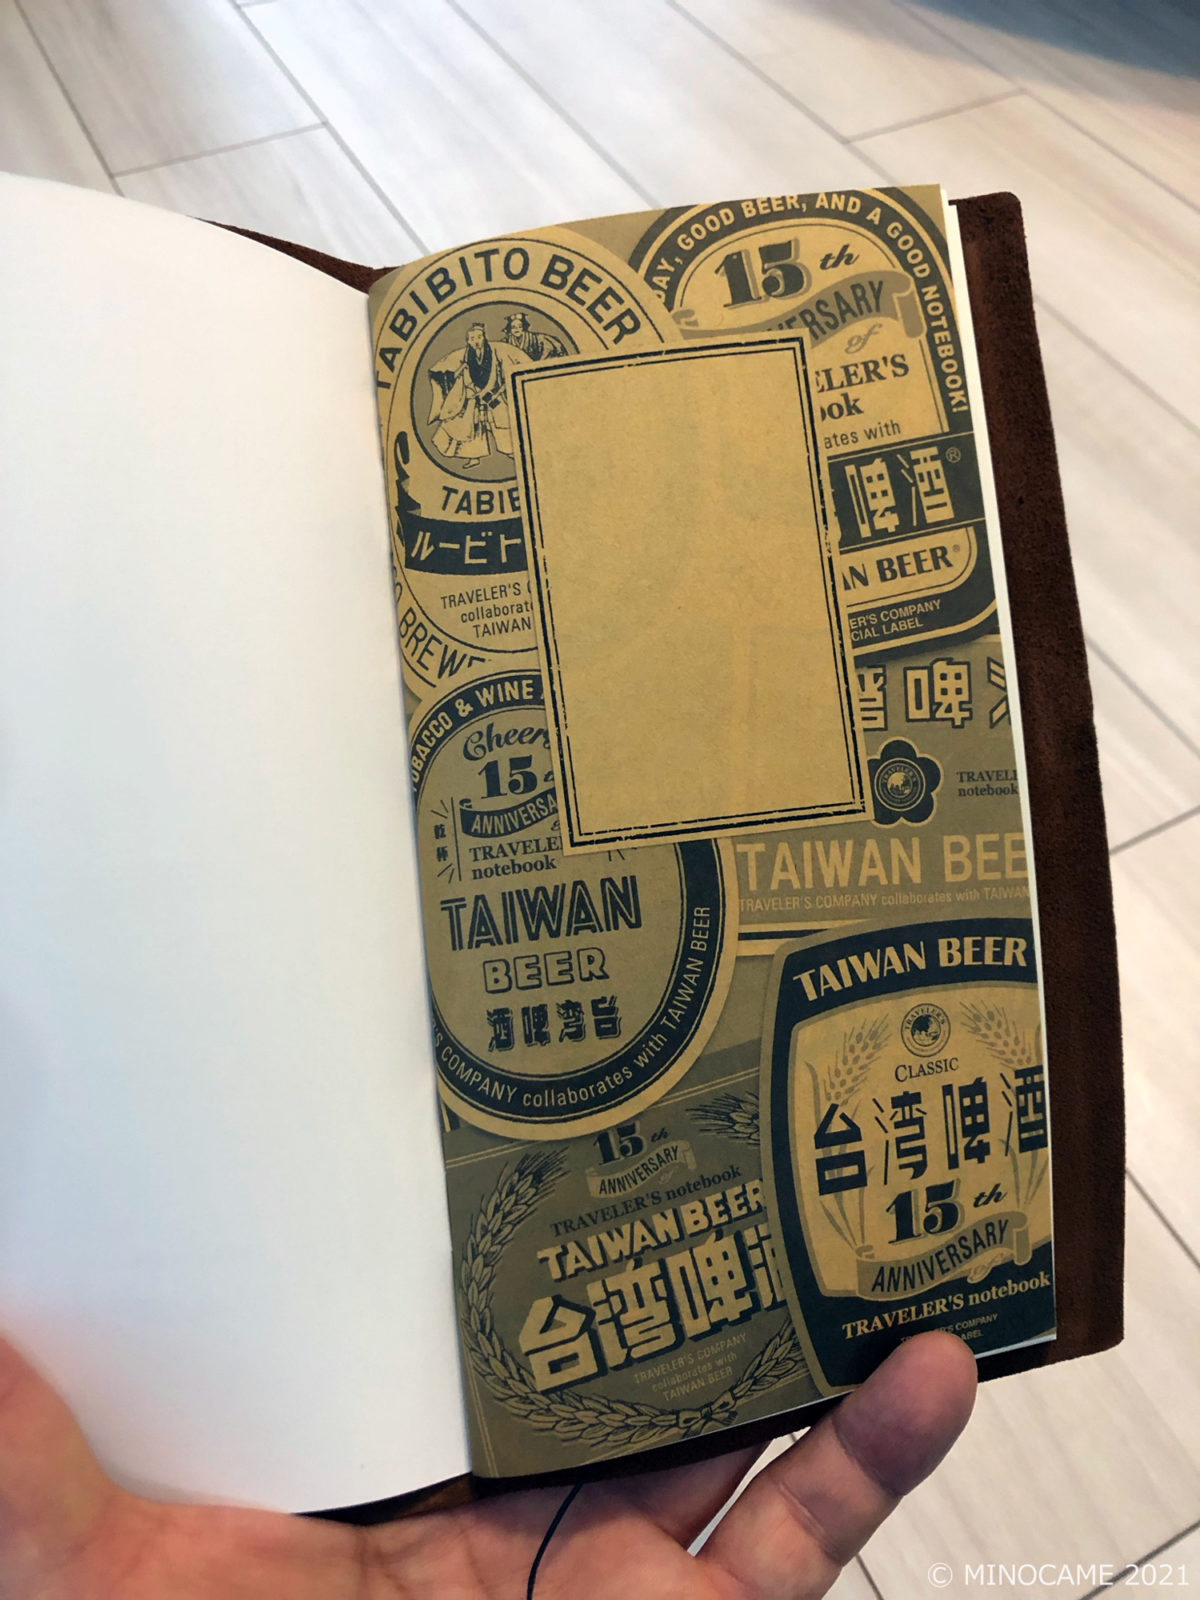 Version of the refill for Travelers Note with LOGO of Taiwan Beer / Collaboration goods arranged by Traveler's factory, Taiwan Beer and Eslite